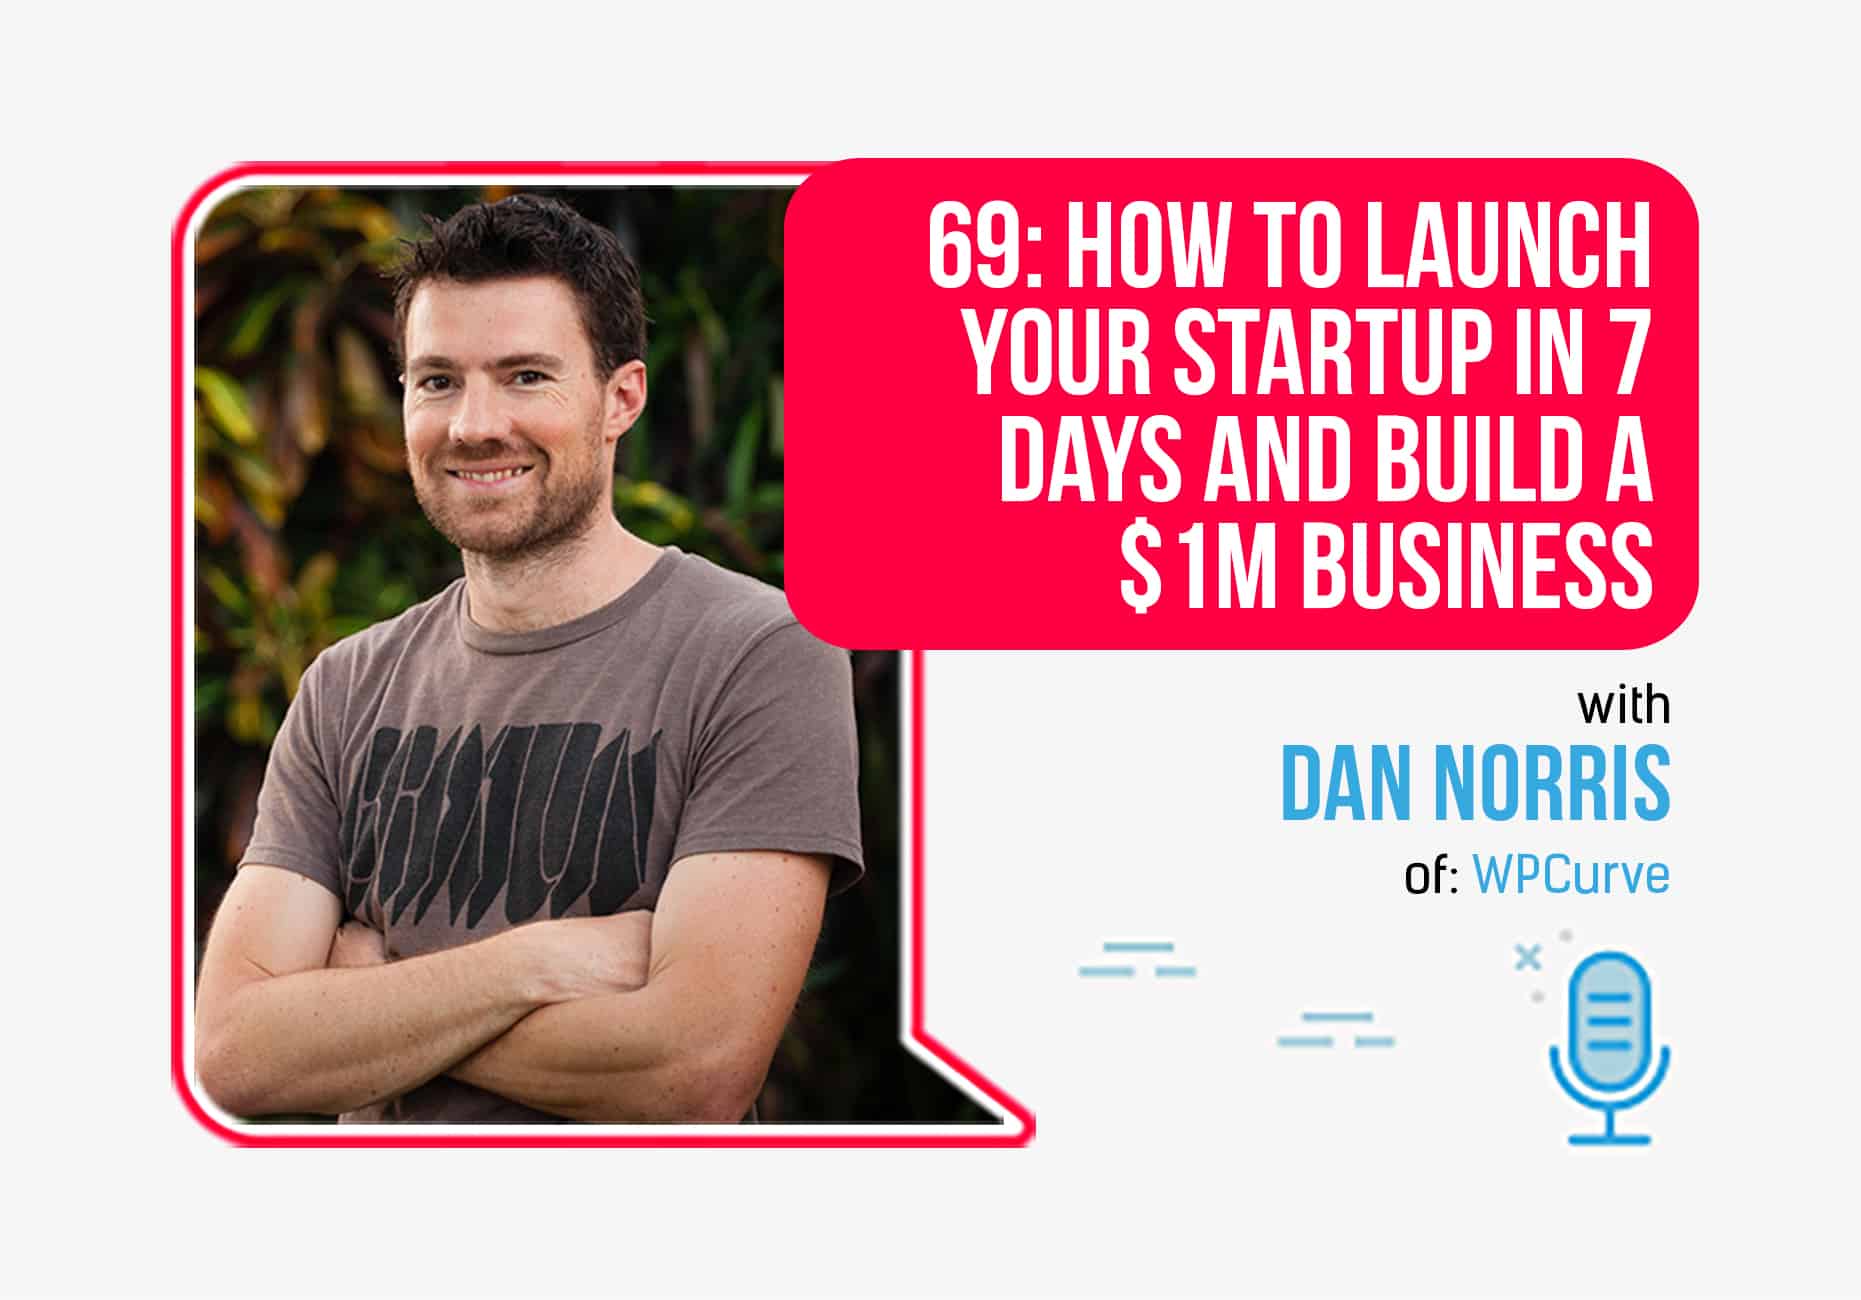 How to Launch Your Startup in 7 Days with Dan Norris - PFP69 - 1861 x 1300 jpeg 646kB